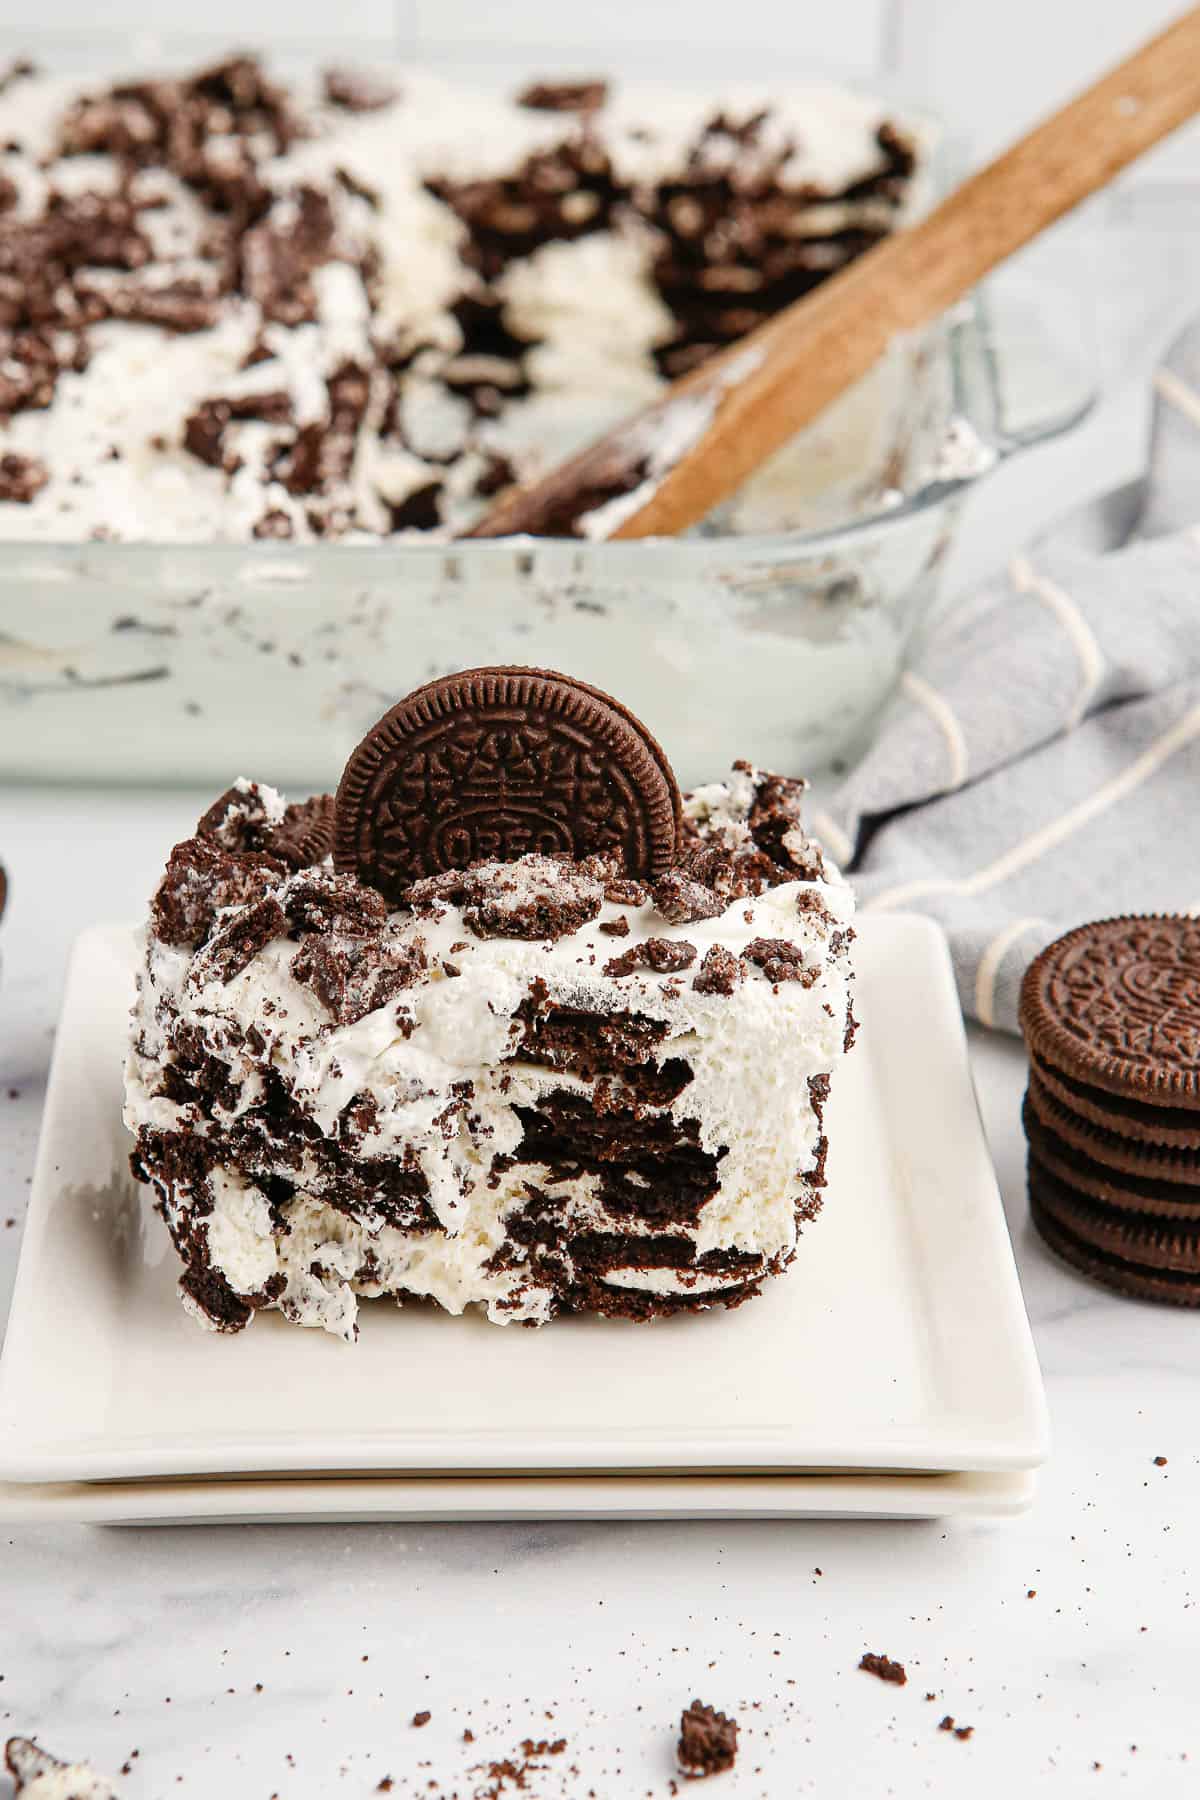 A serving of Oreo Icebox Cake on a white square plate with the baking dish of remaining cake in the background and a stack of Oreo cookies on one side.